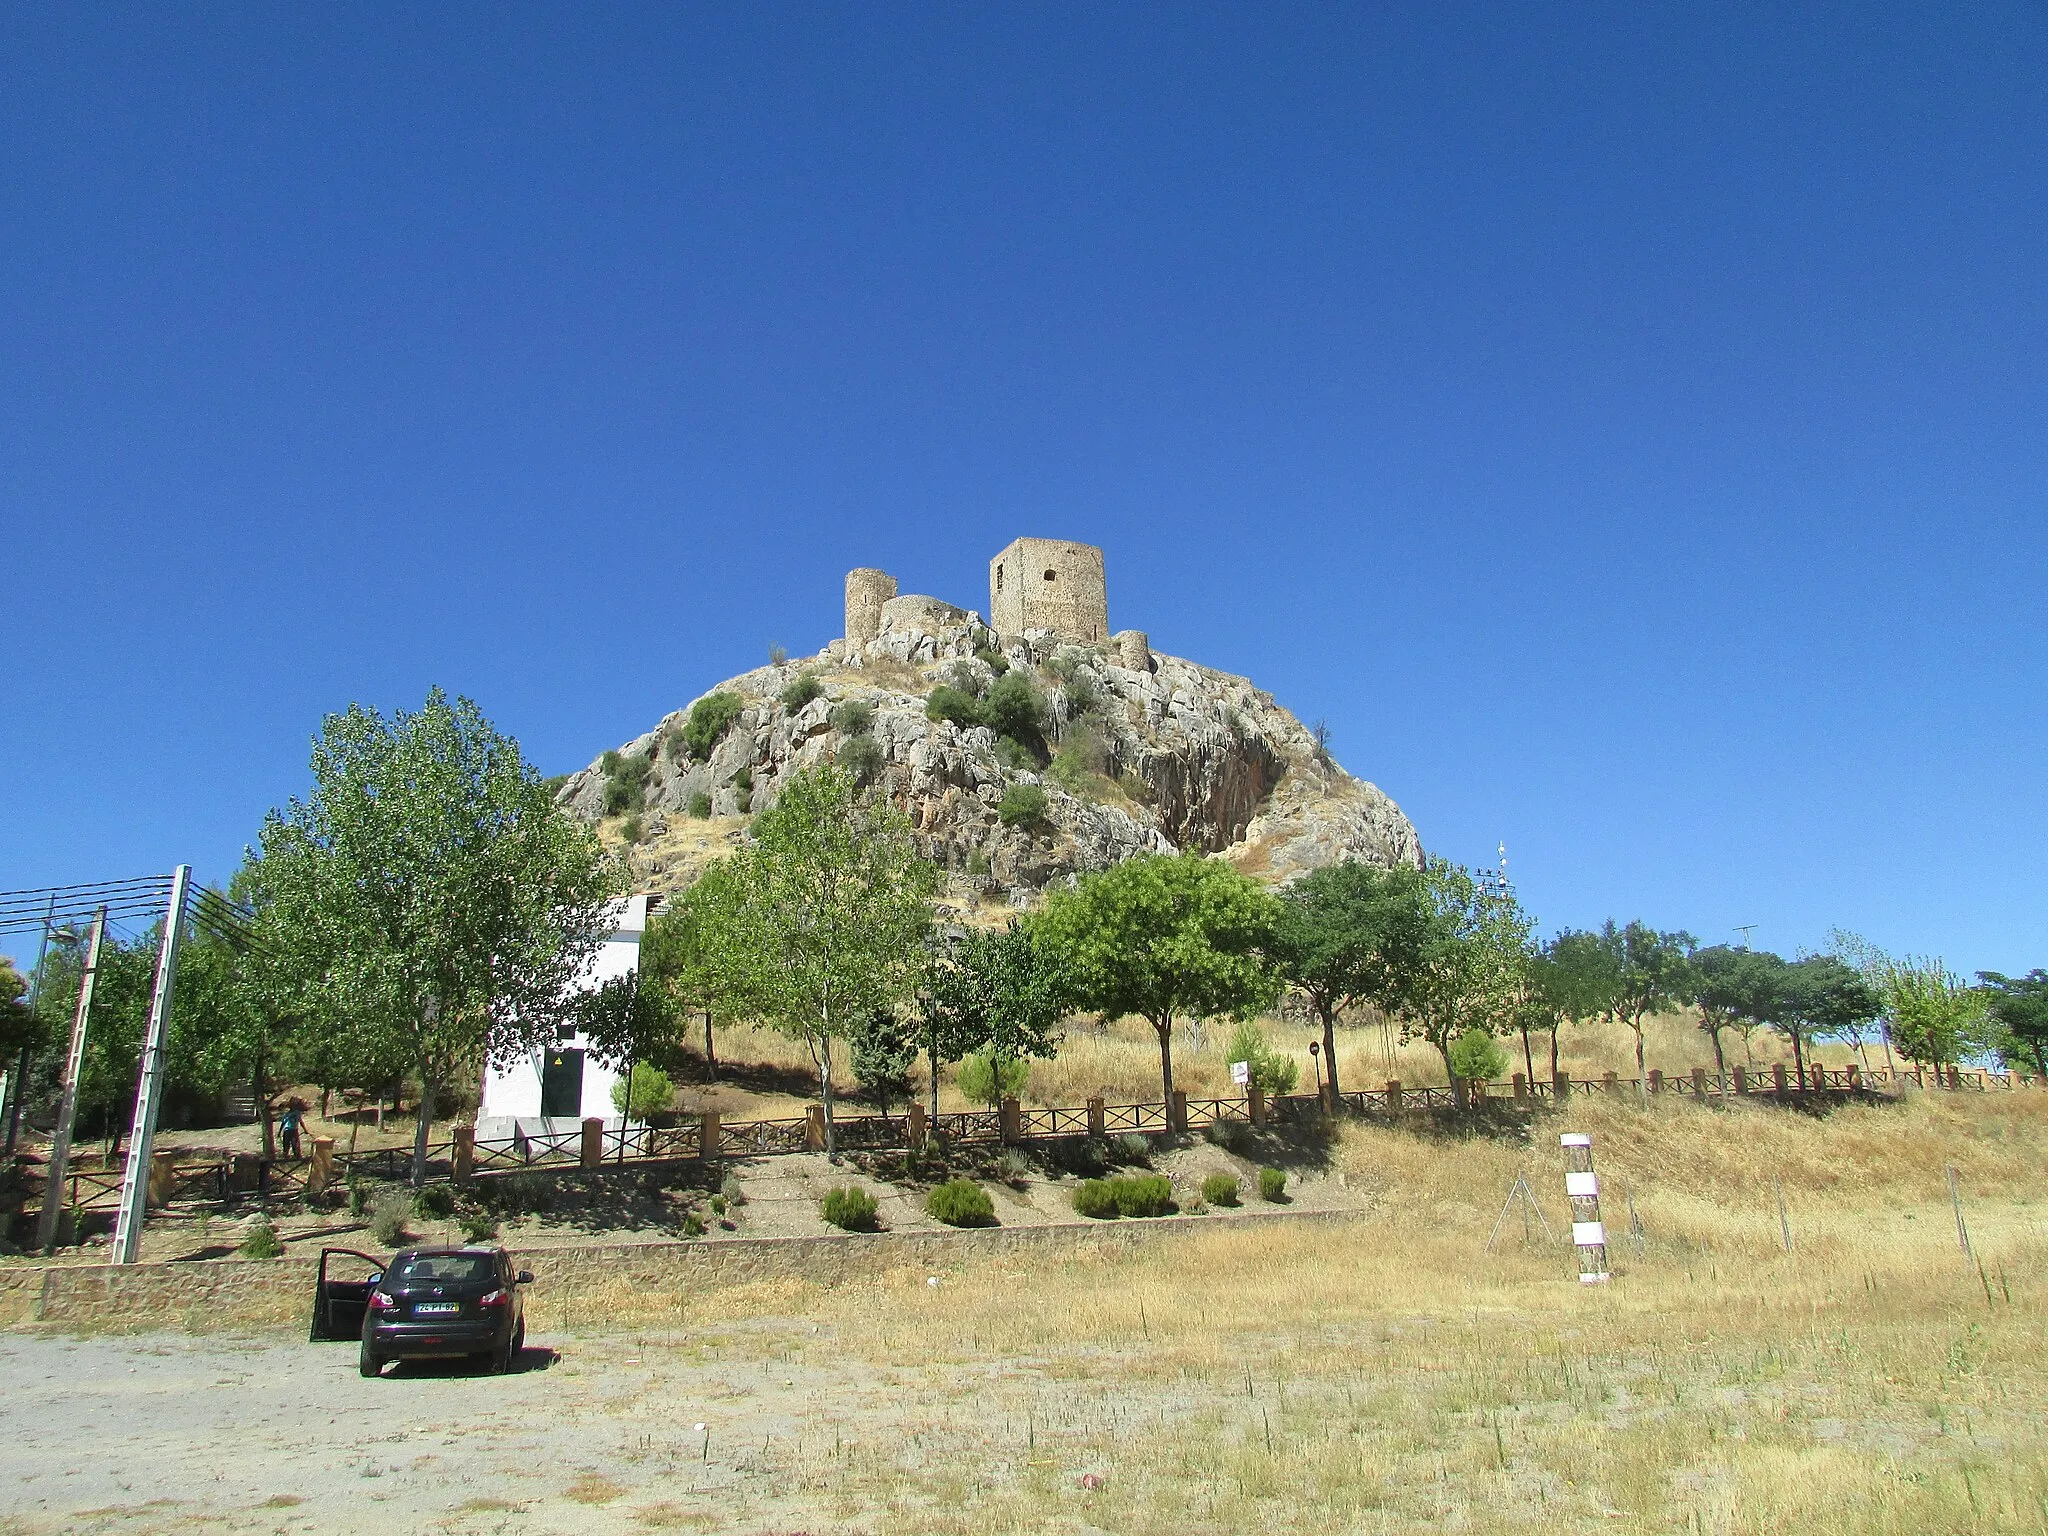 Photo showing: A view looking eastwards to the Castle of Belmez (Castillo de Belmez) which is a small fortress located in Bélmez in the Province of Córdoba, Spain.